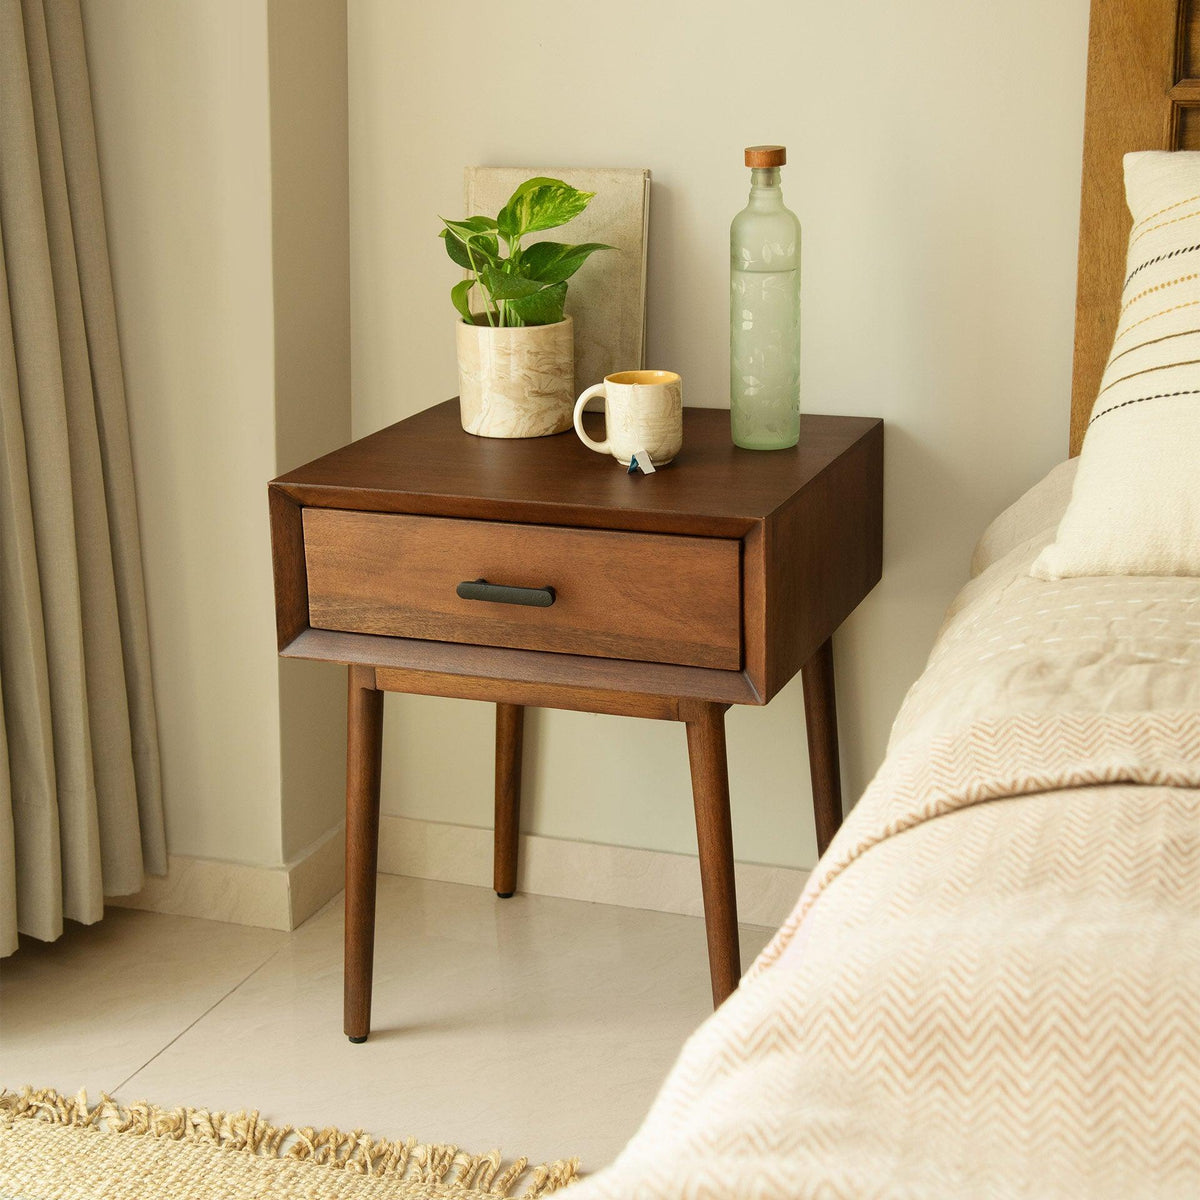 Old World ready-to-assemble bedside drawer - ellementry